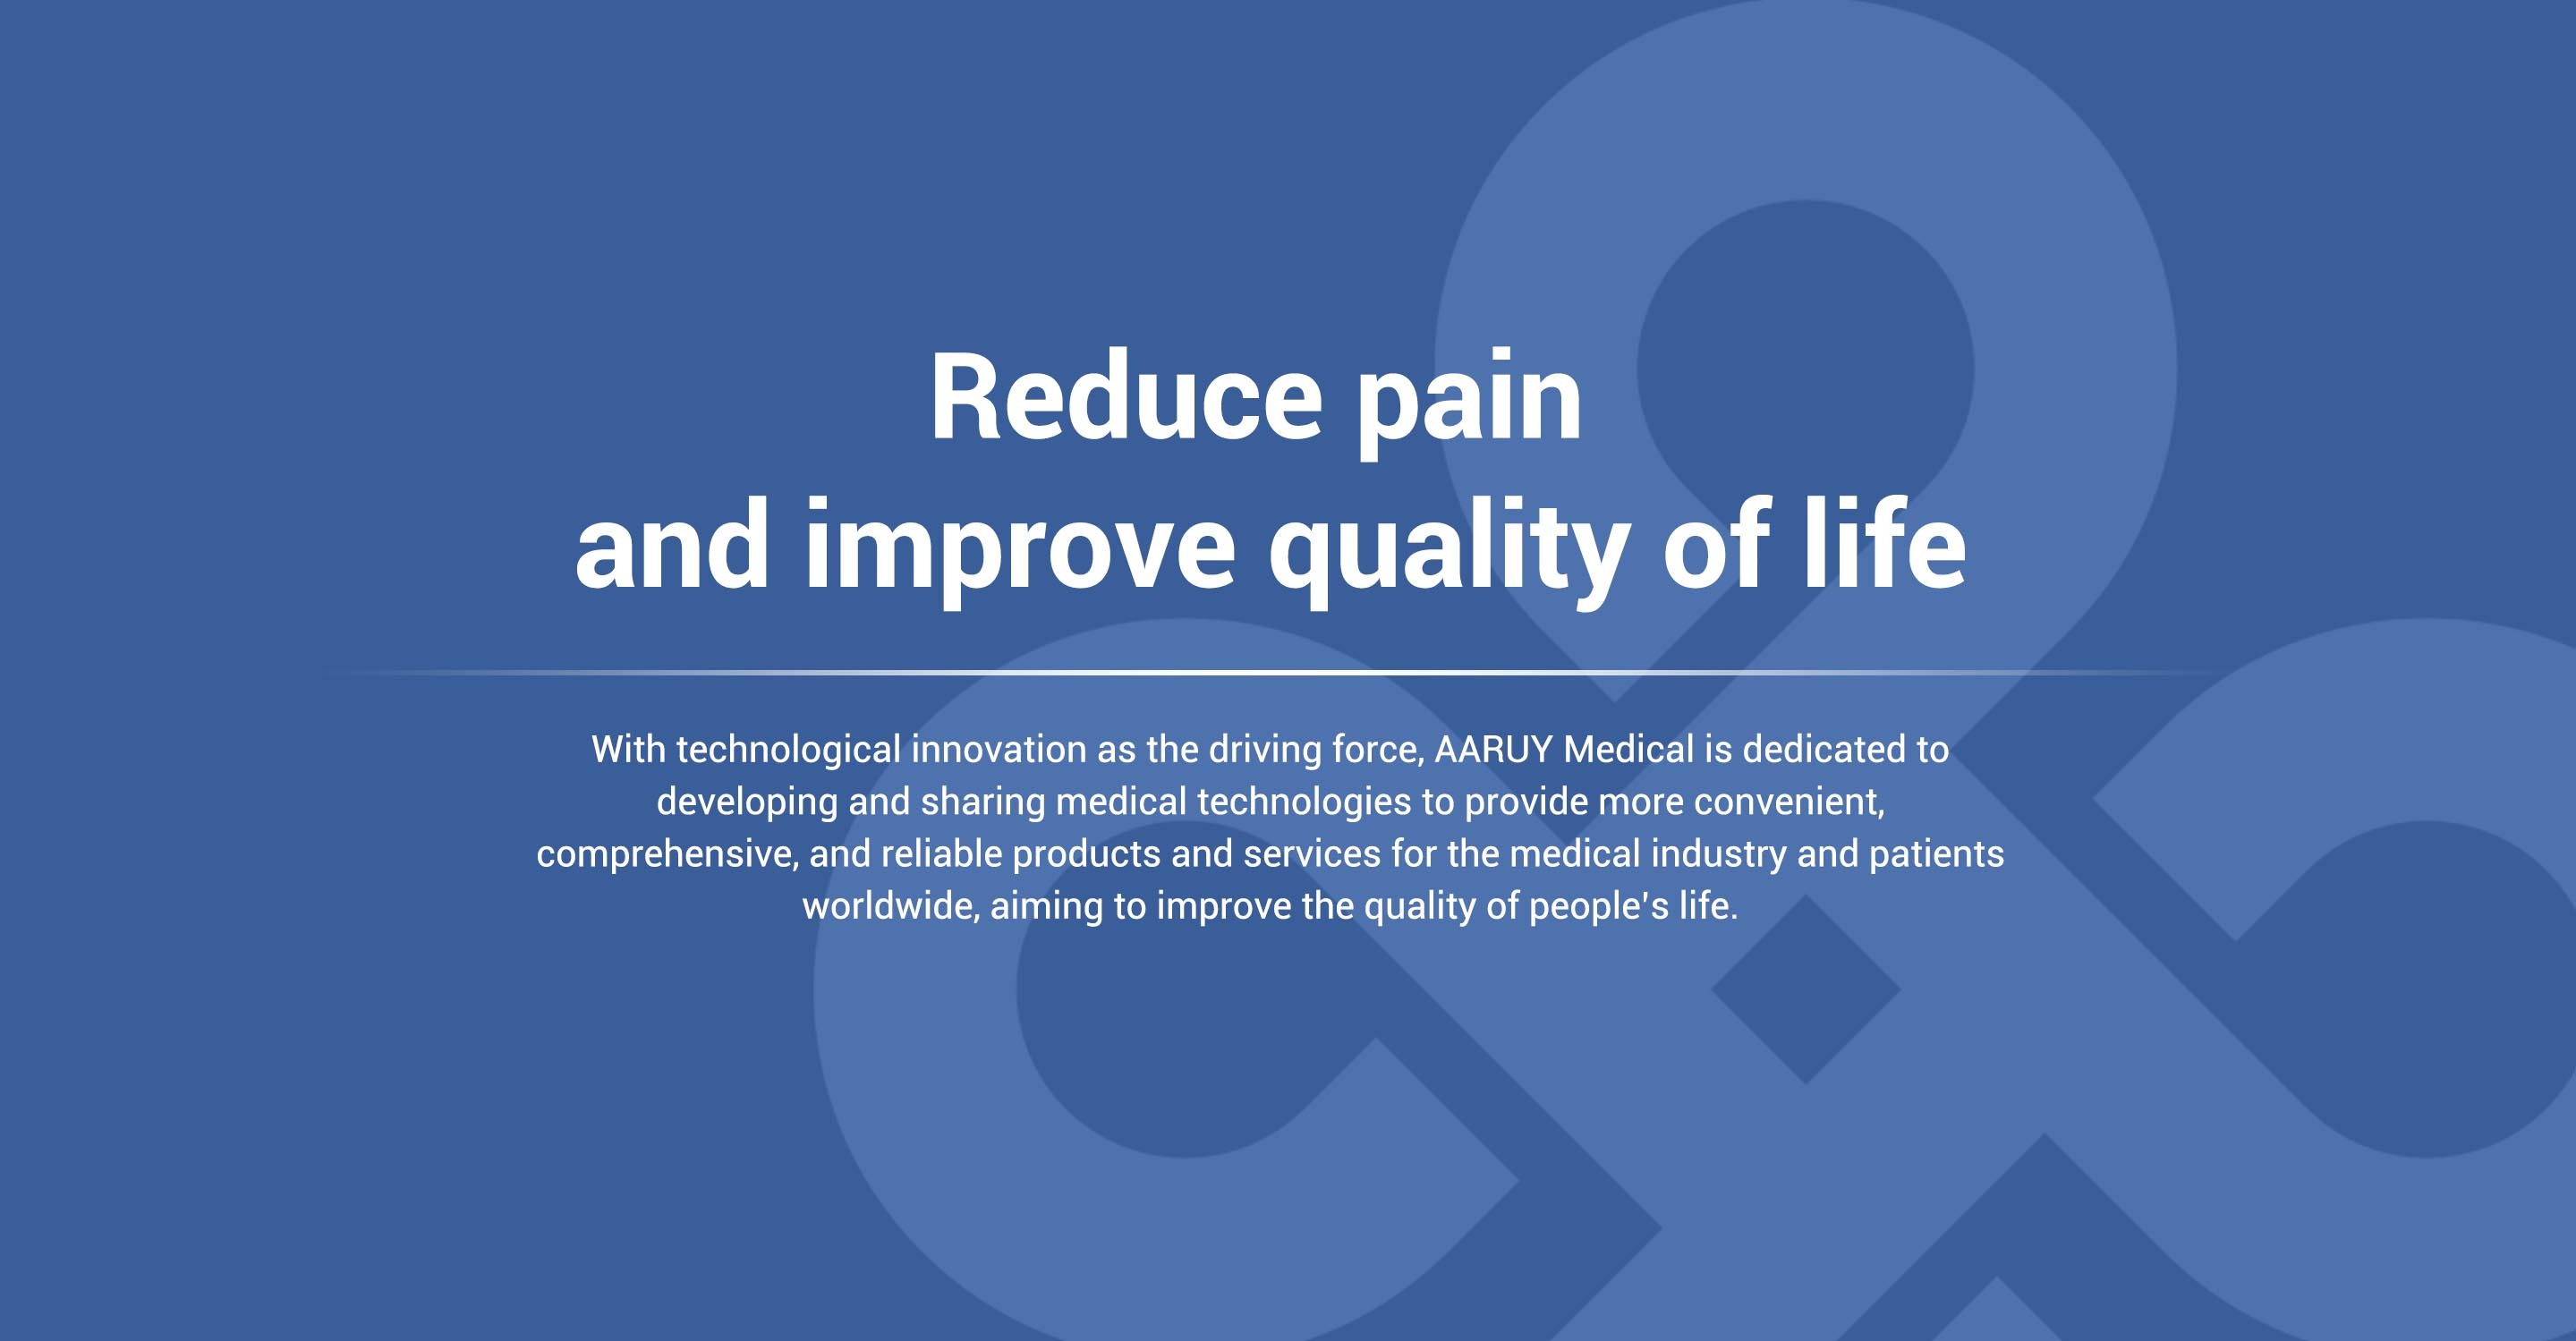 Alleviating human pain and improving quality of life